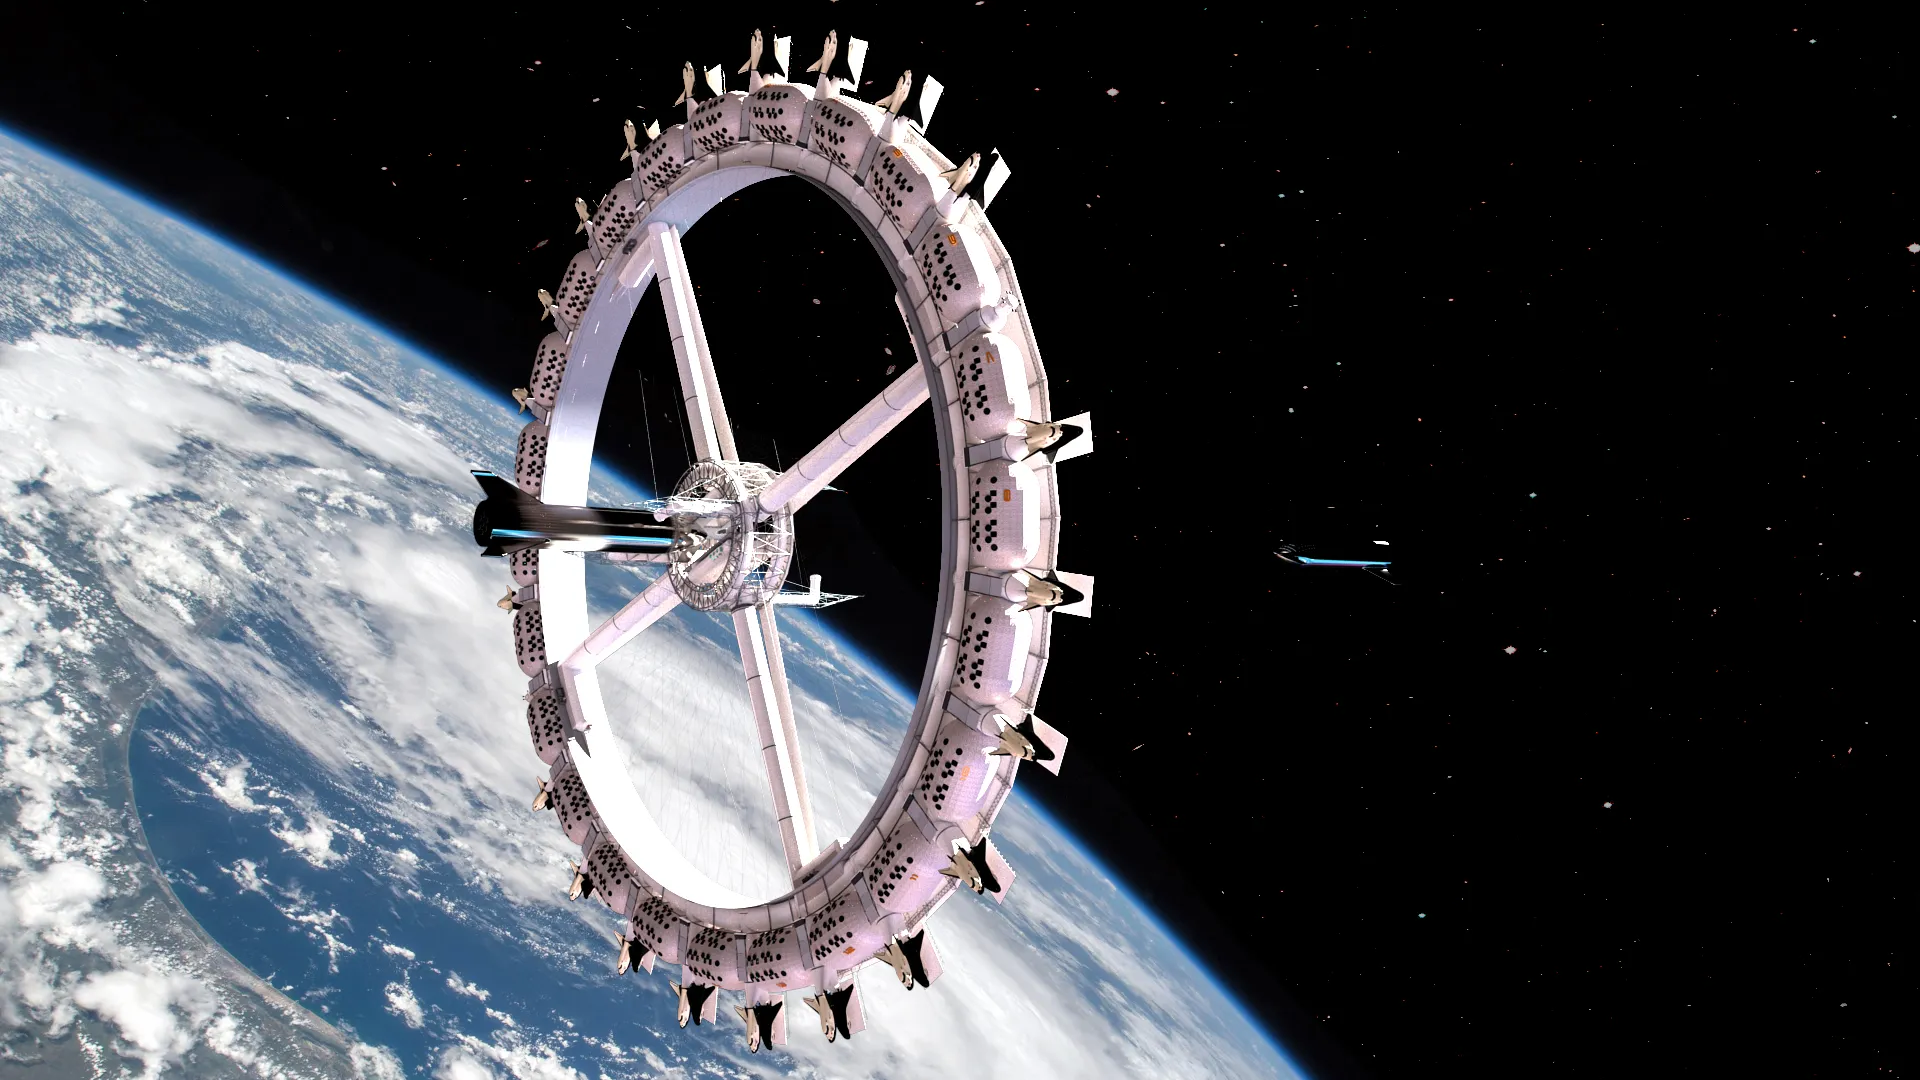 Buy a Vacation Home in Space, World's First Space Hotel Will Open in 2027!